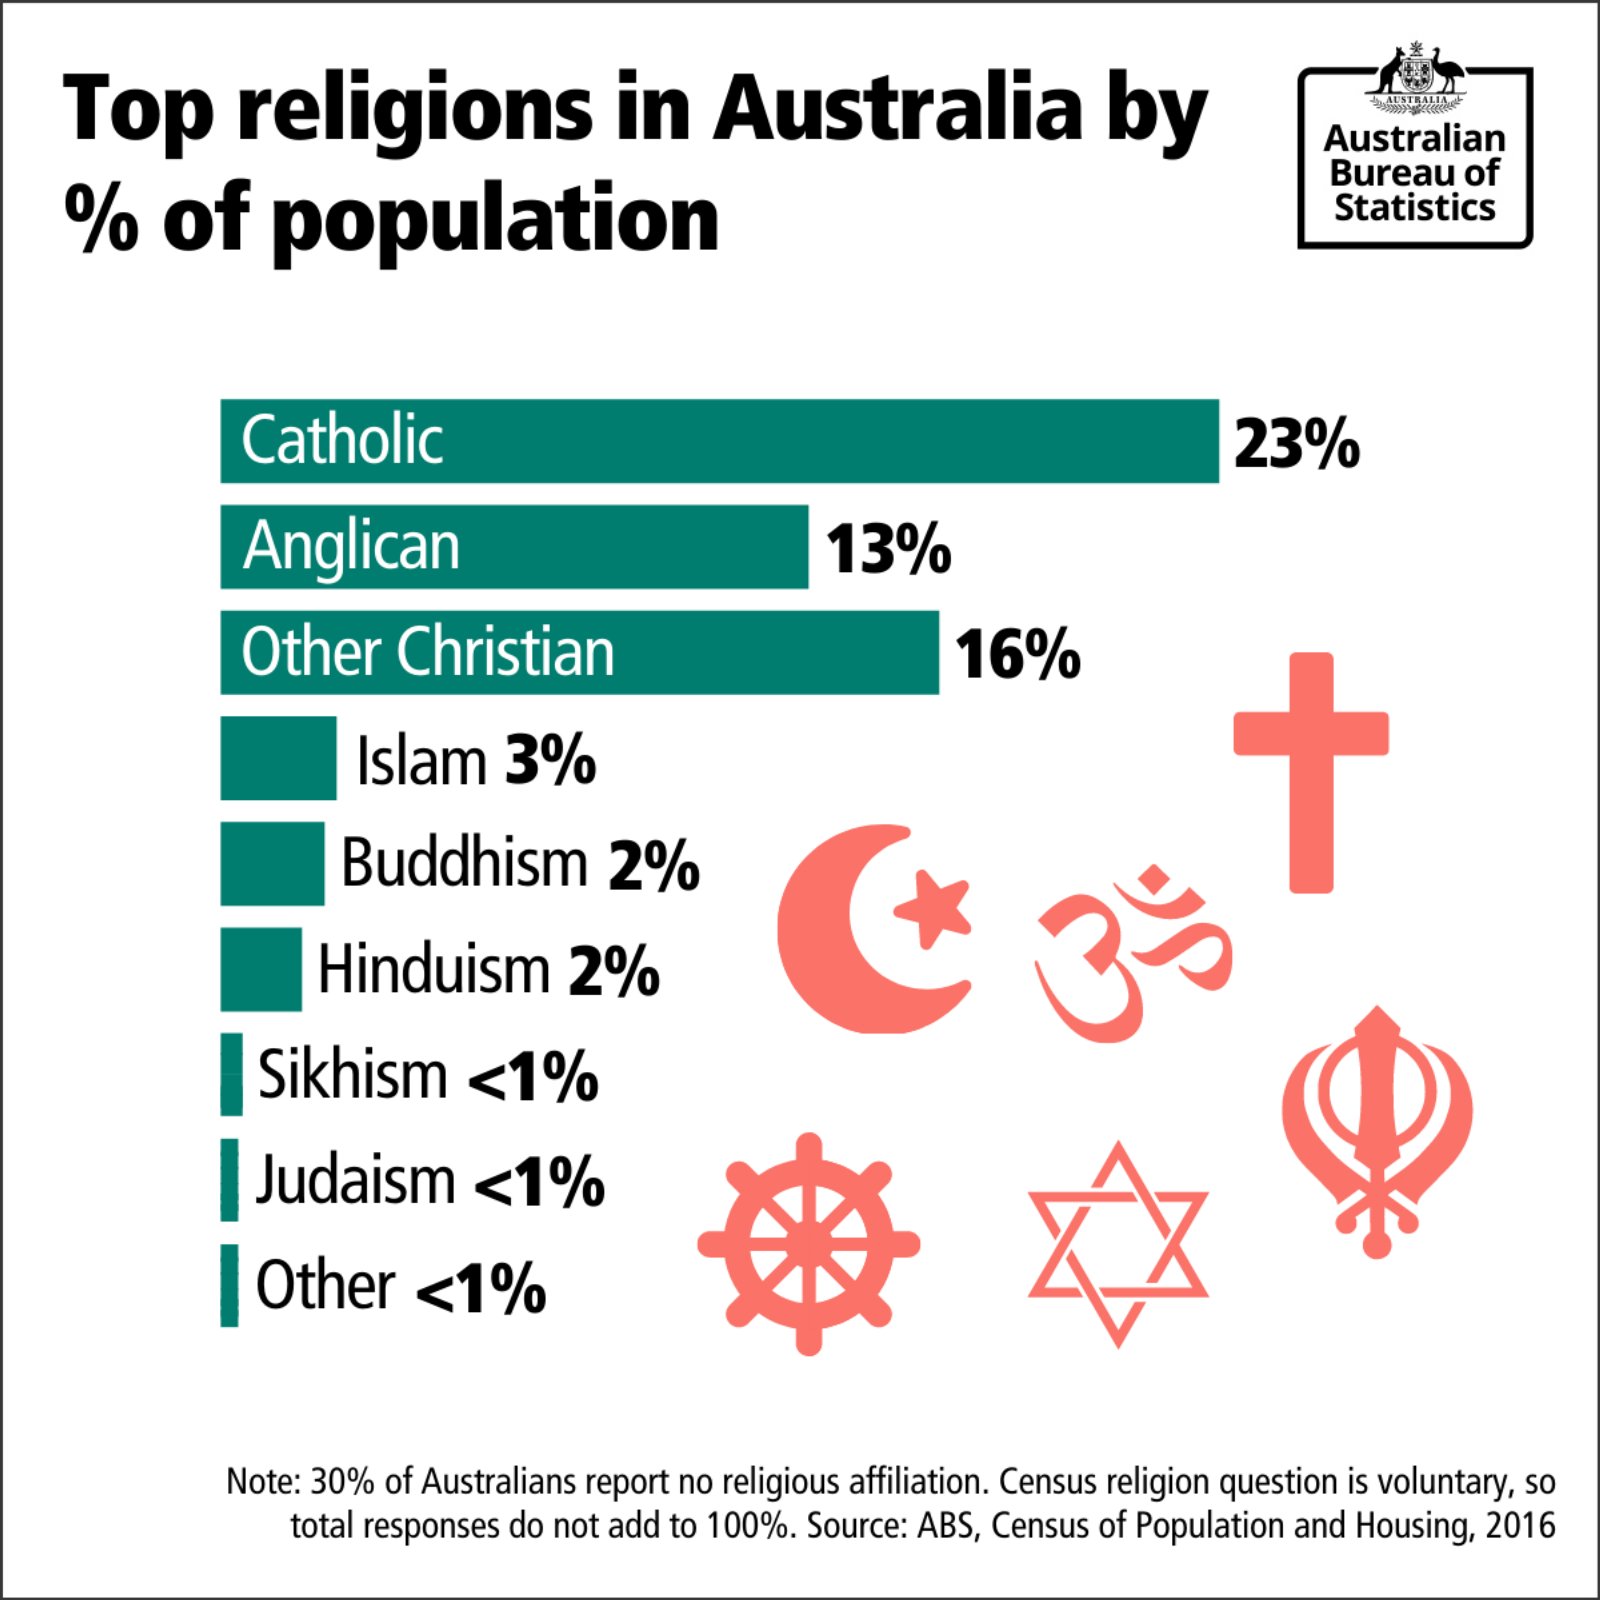 Australian of Statistics on Twitter: "It's #WorldReligionDay - here the top religions in Australia... https://t.co/wLy8u9VkeP" / Twitter